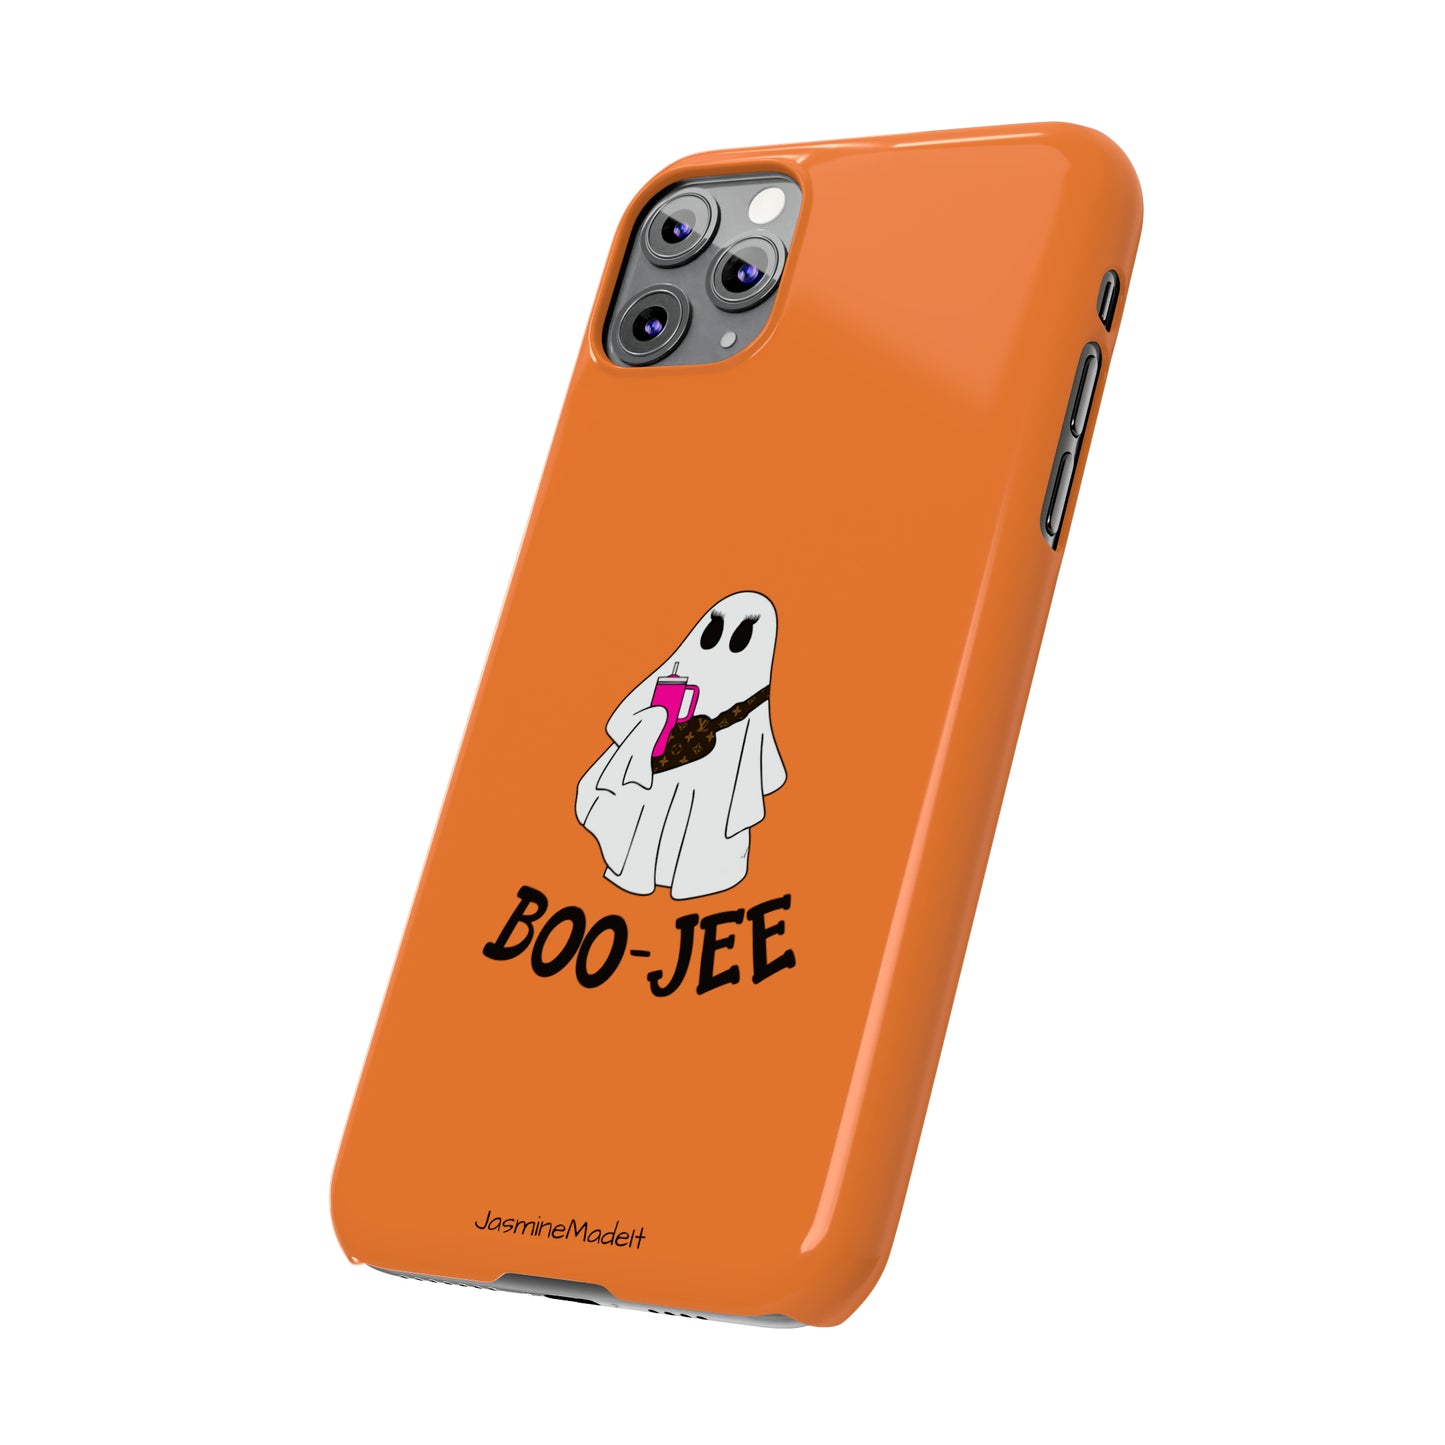 Boo Jee Stanley IPhone Case